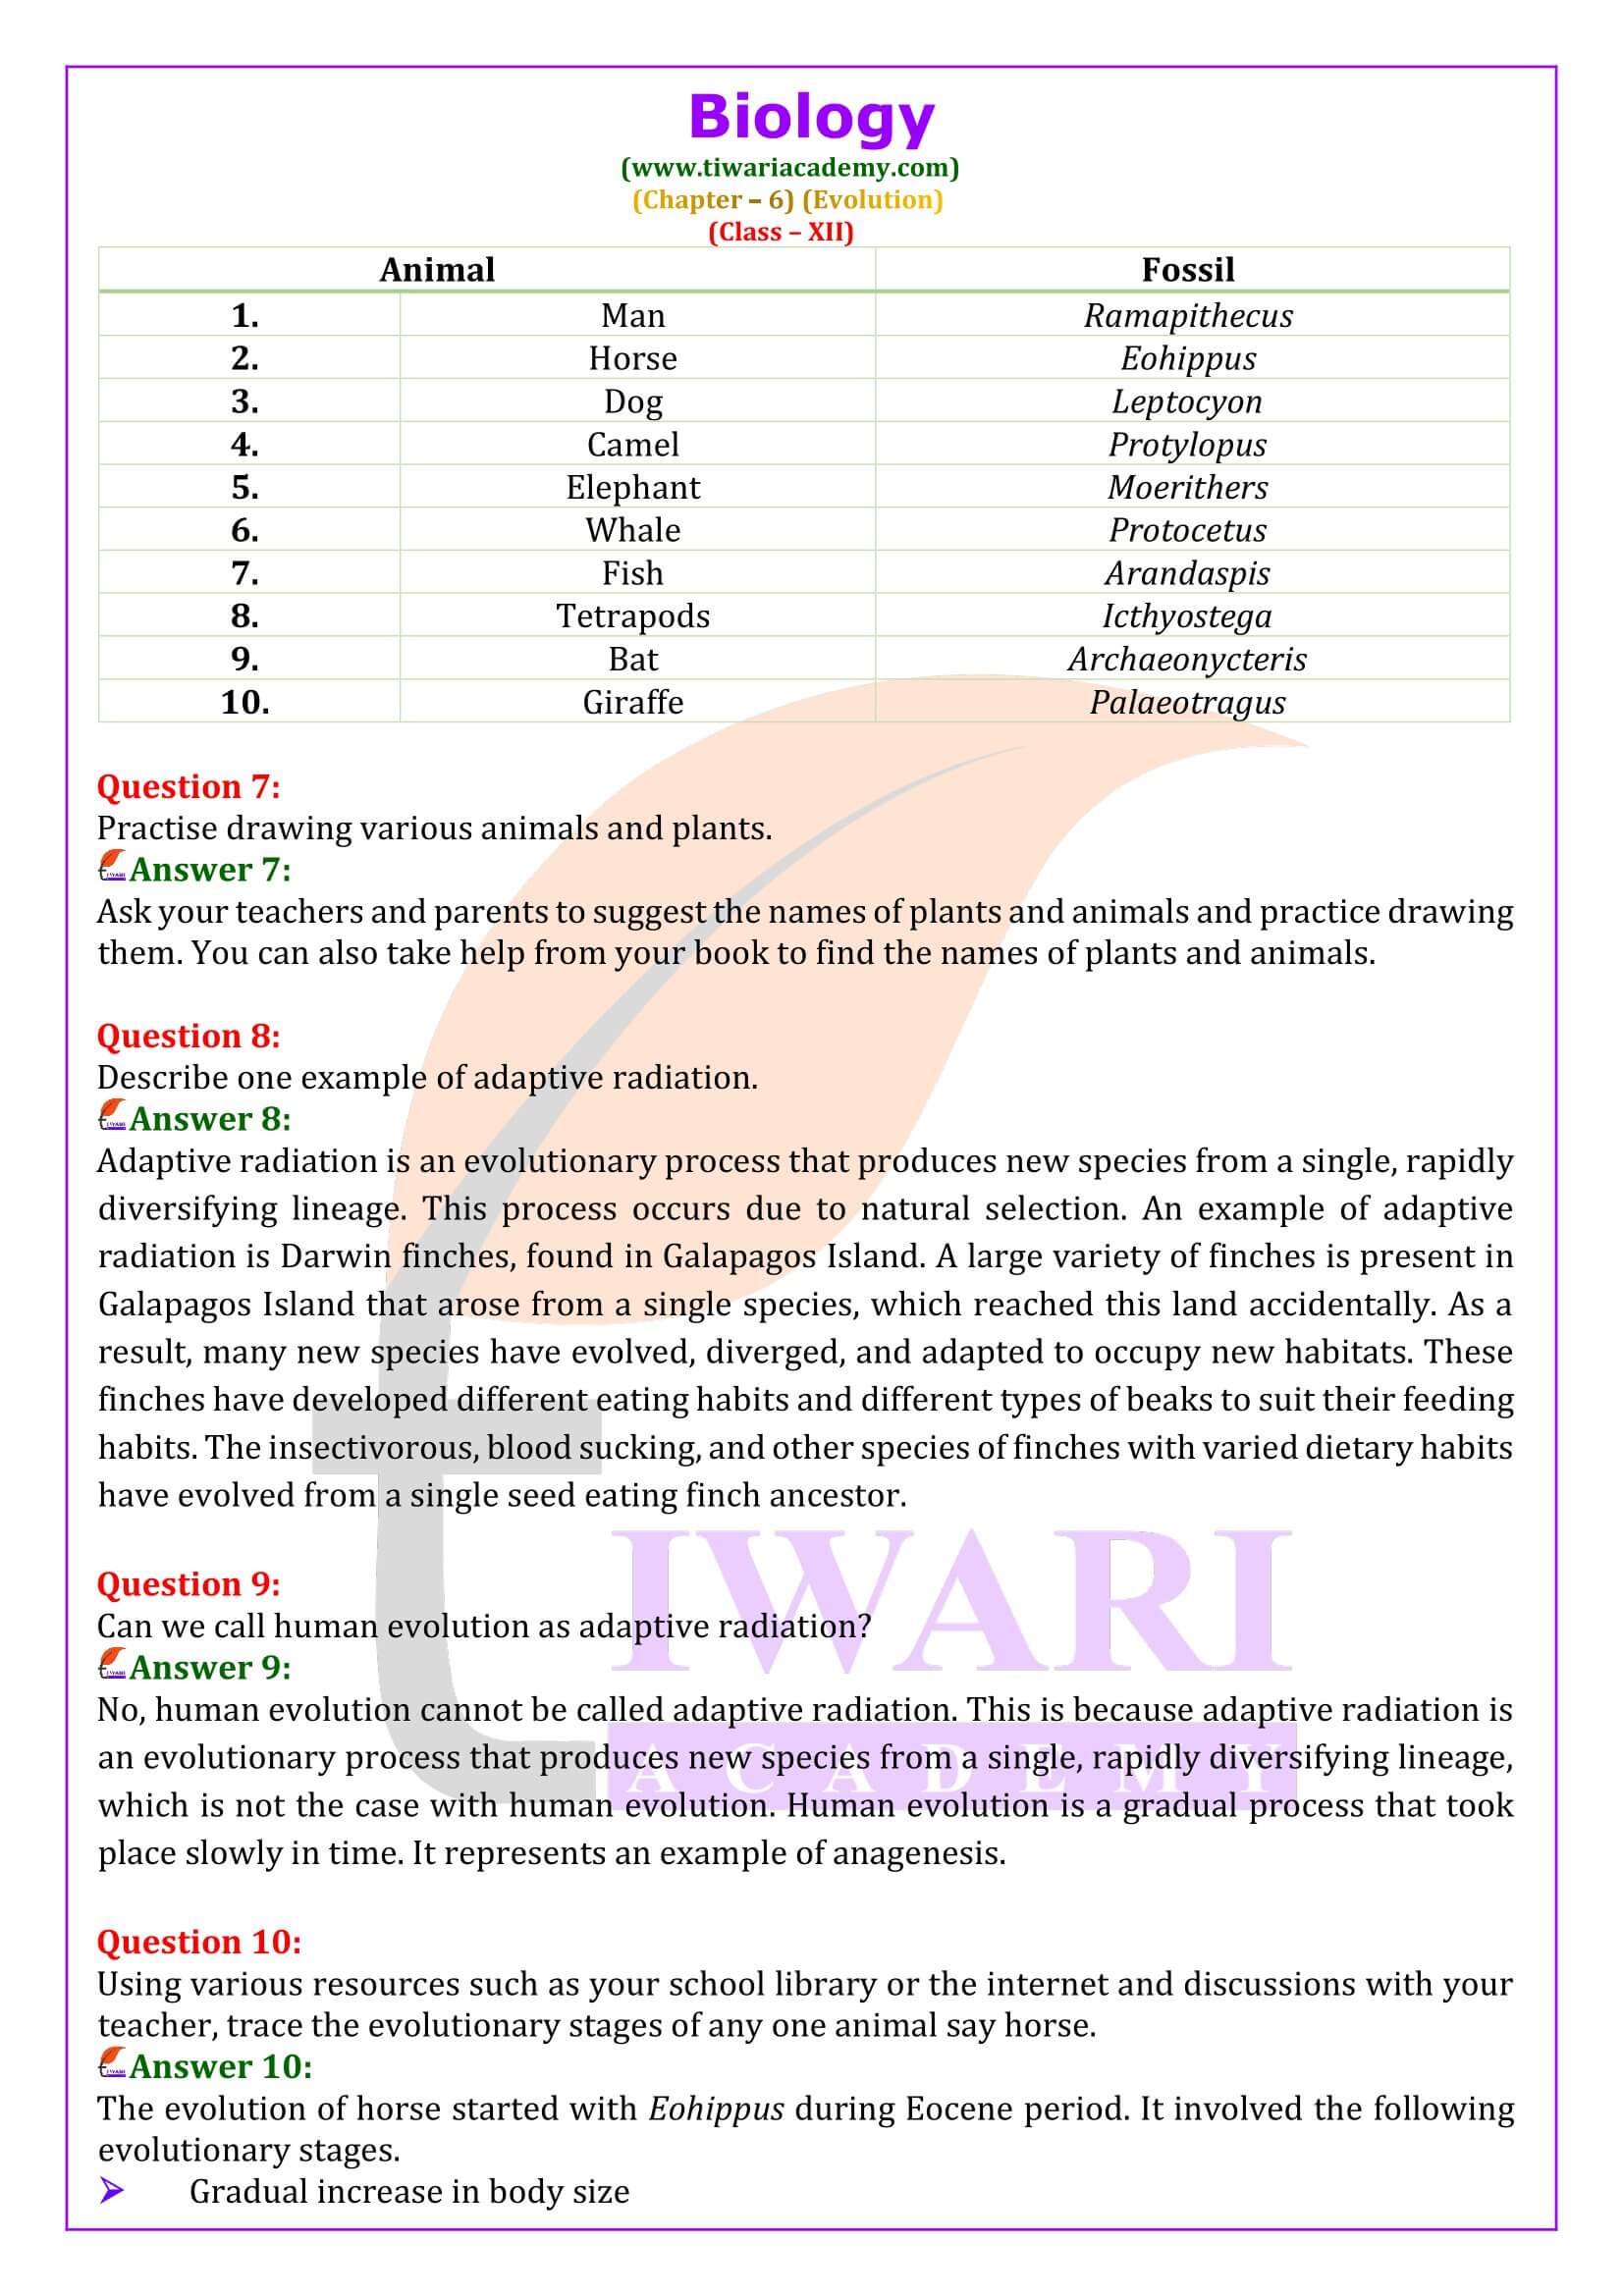 NCERT Solutions for Class 12 Biology Chapter 6 in English Medium